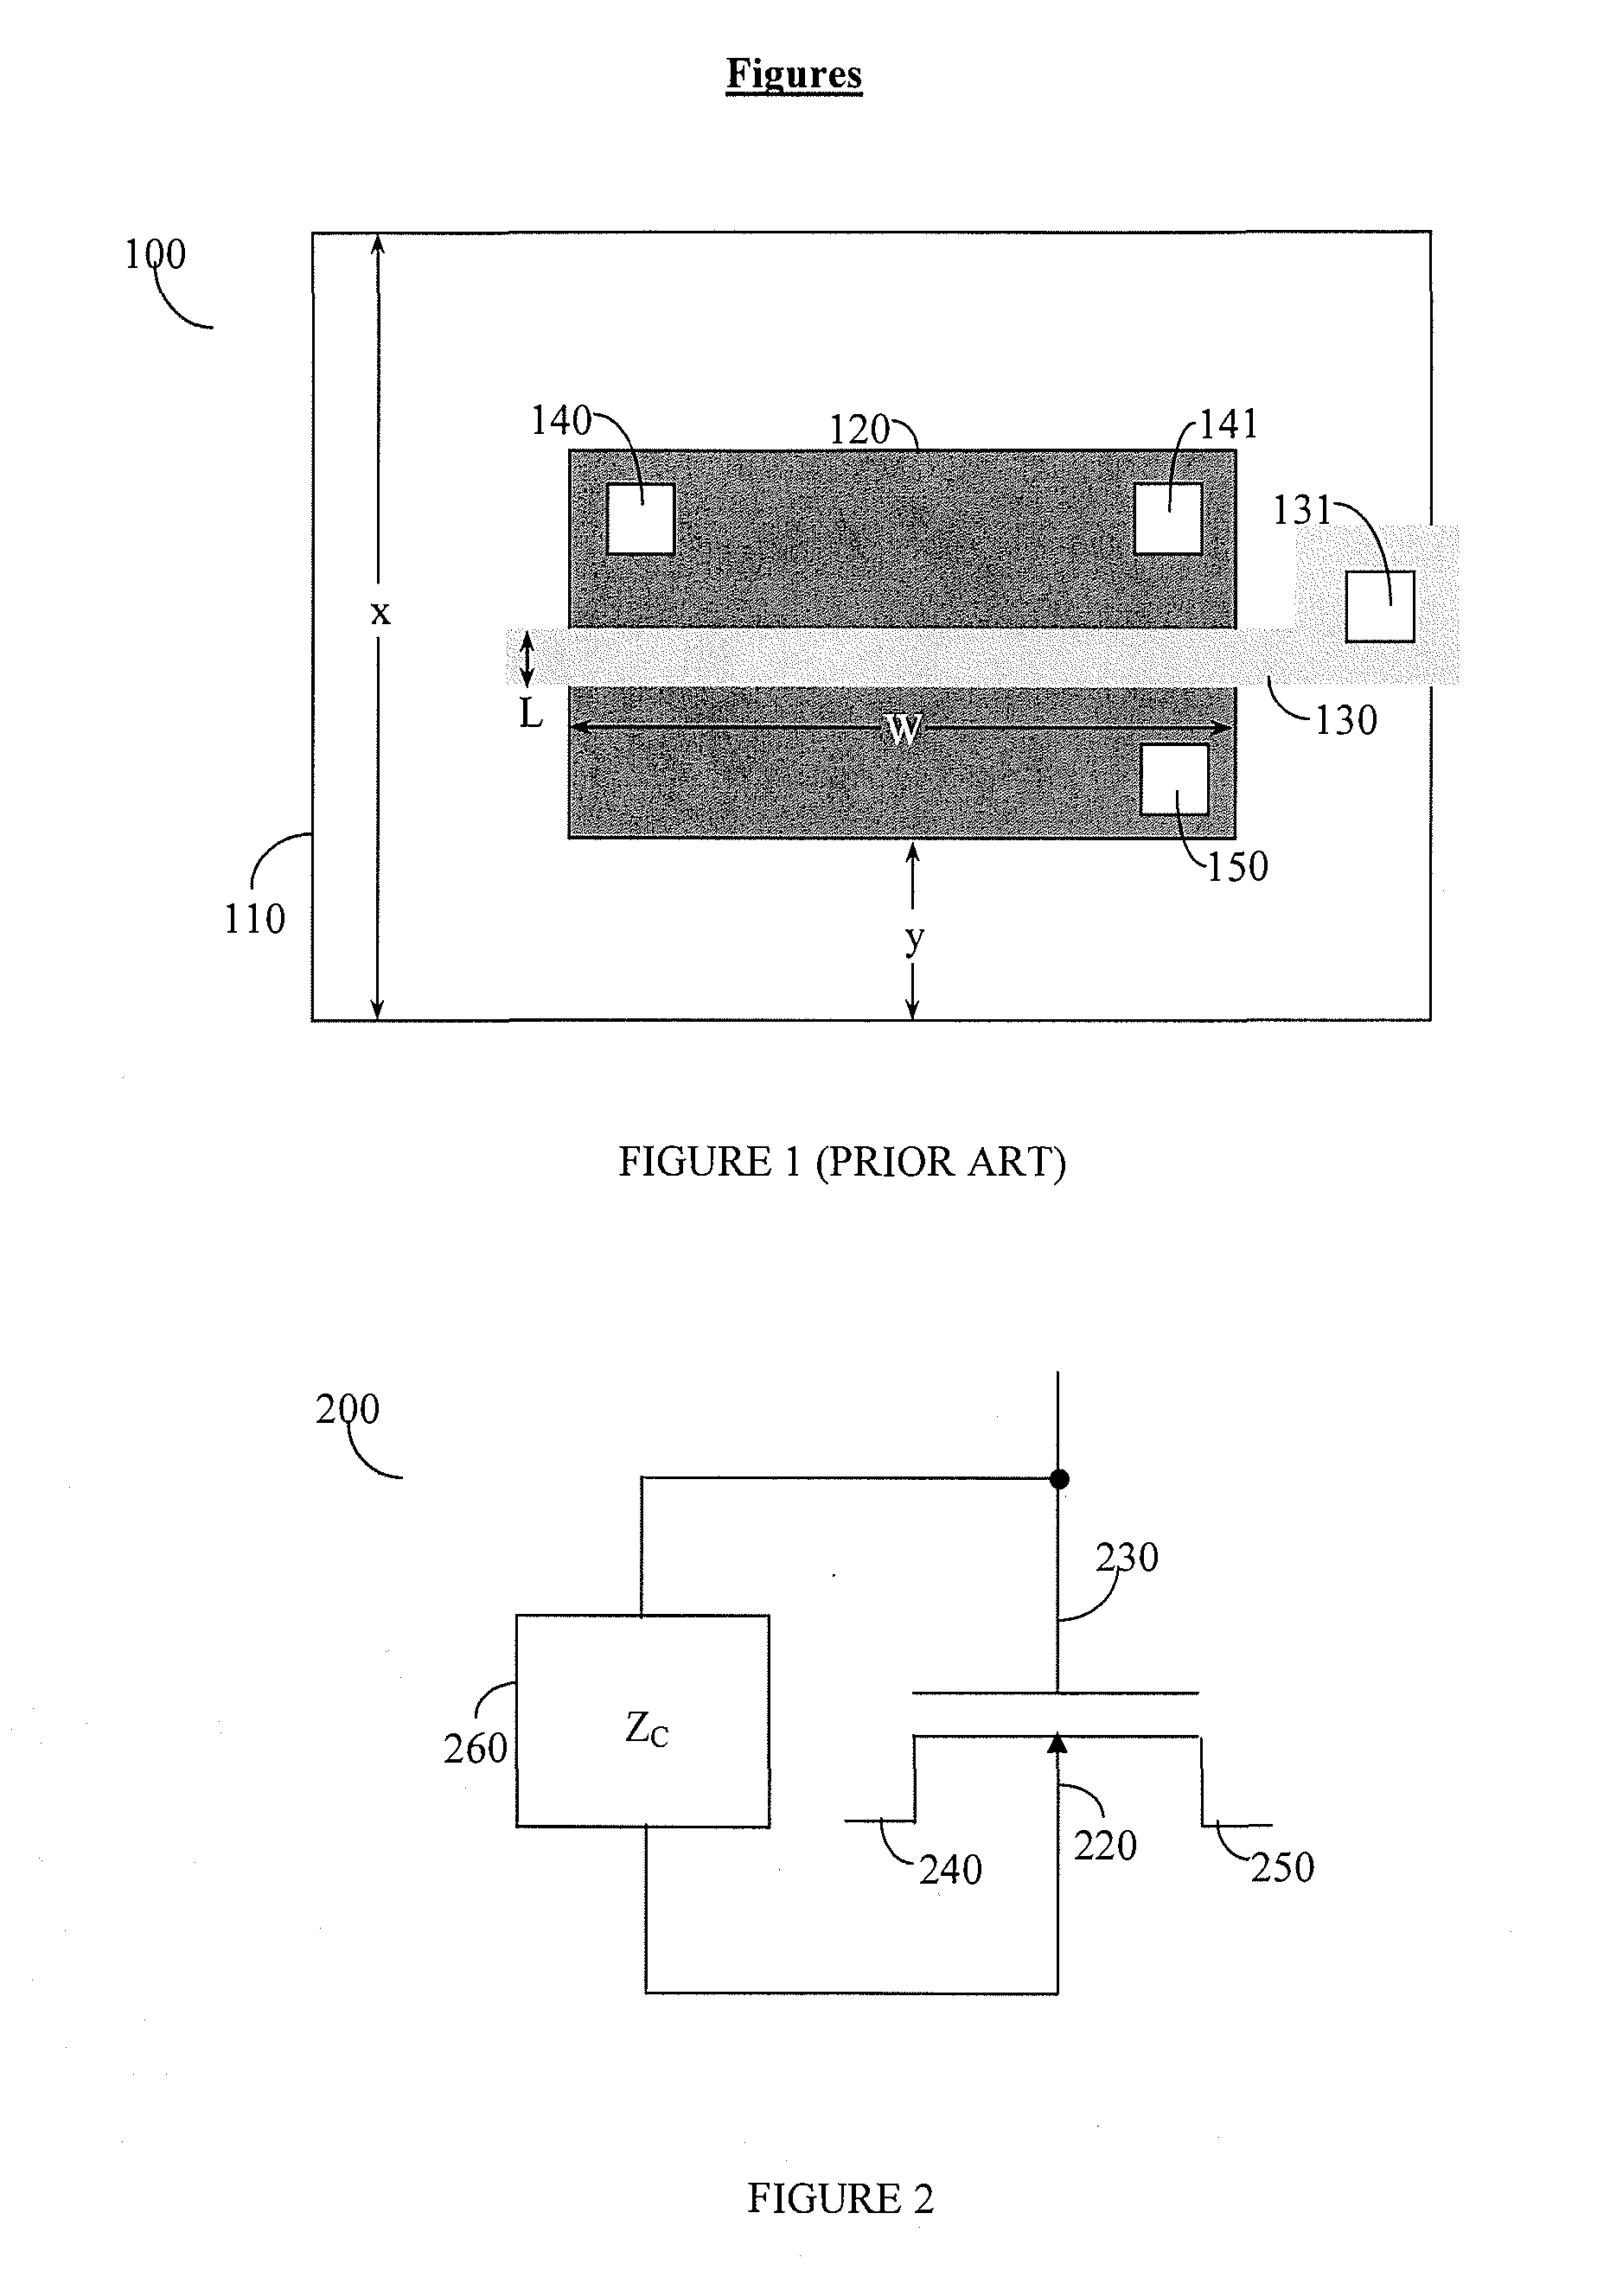 Apparatus and Method for Improving Drive-Strength and Leakage of Deep Submicron MOS Transistors